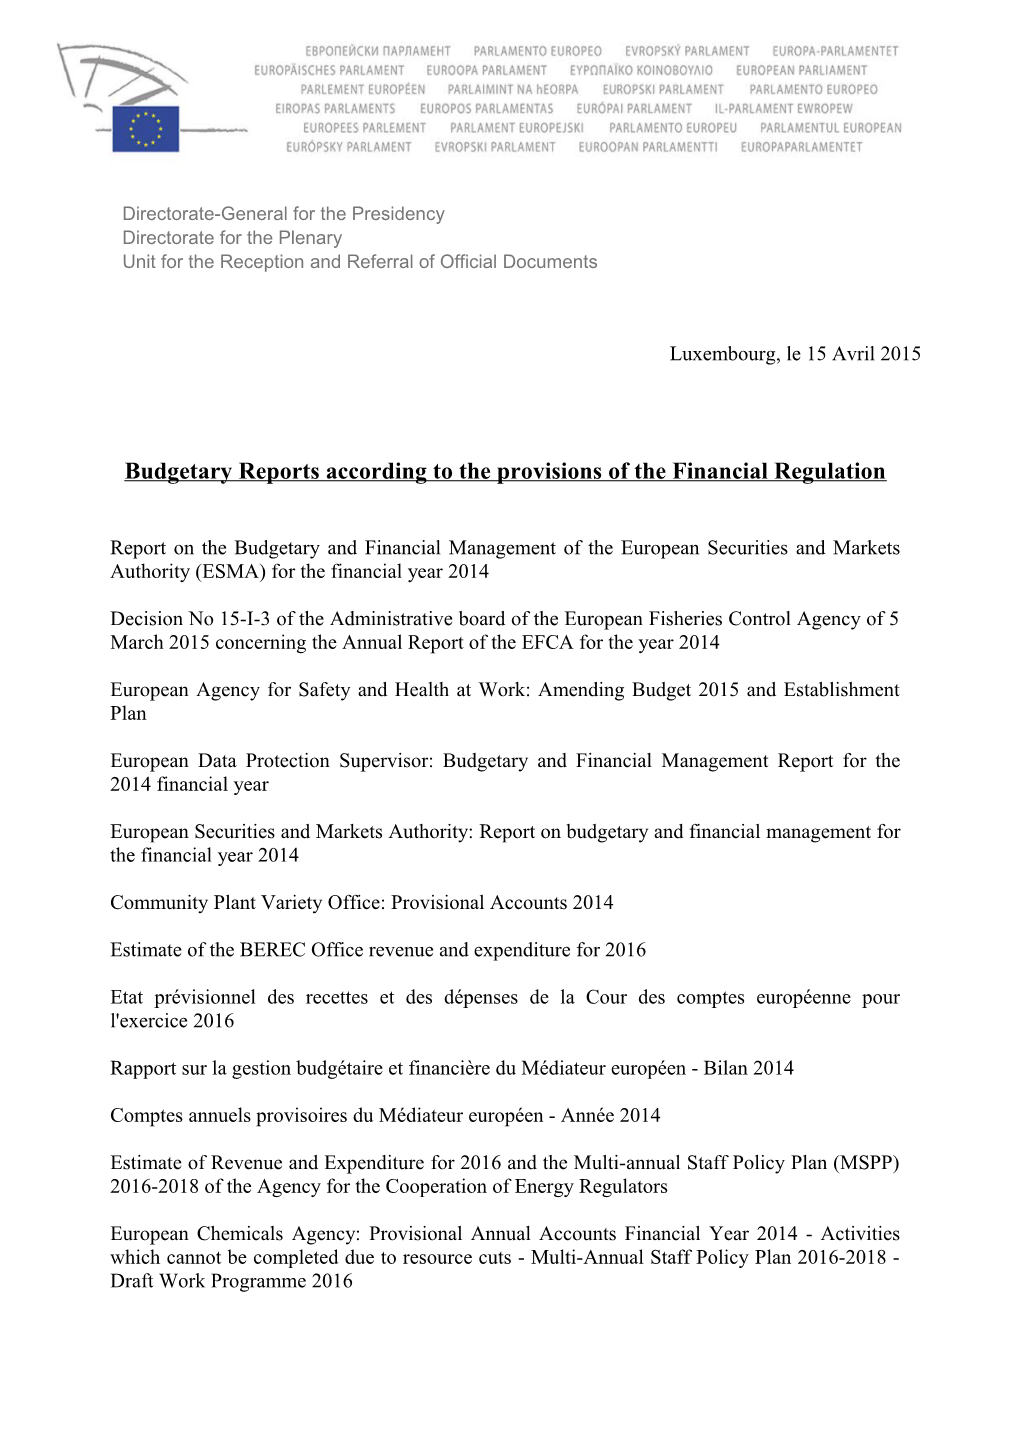 Budgetary Reports According to the Provisions of the Financial Regulation